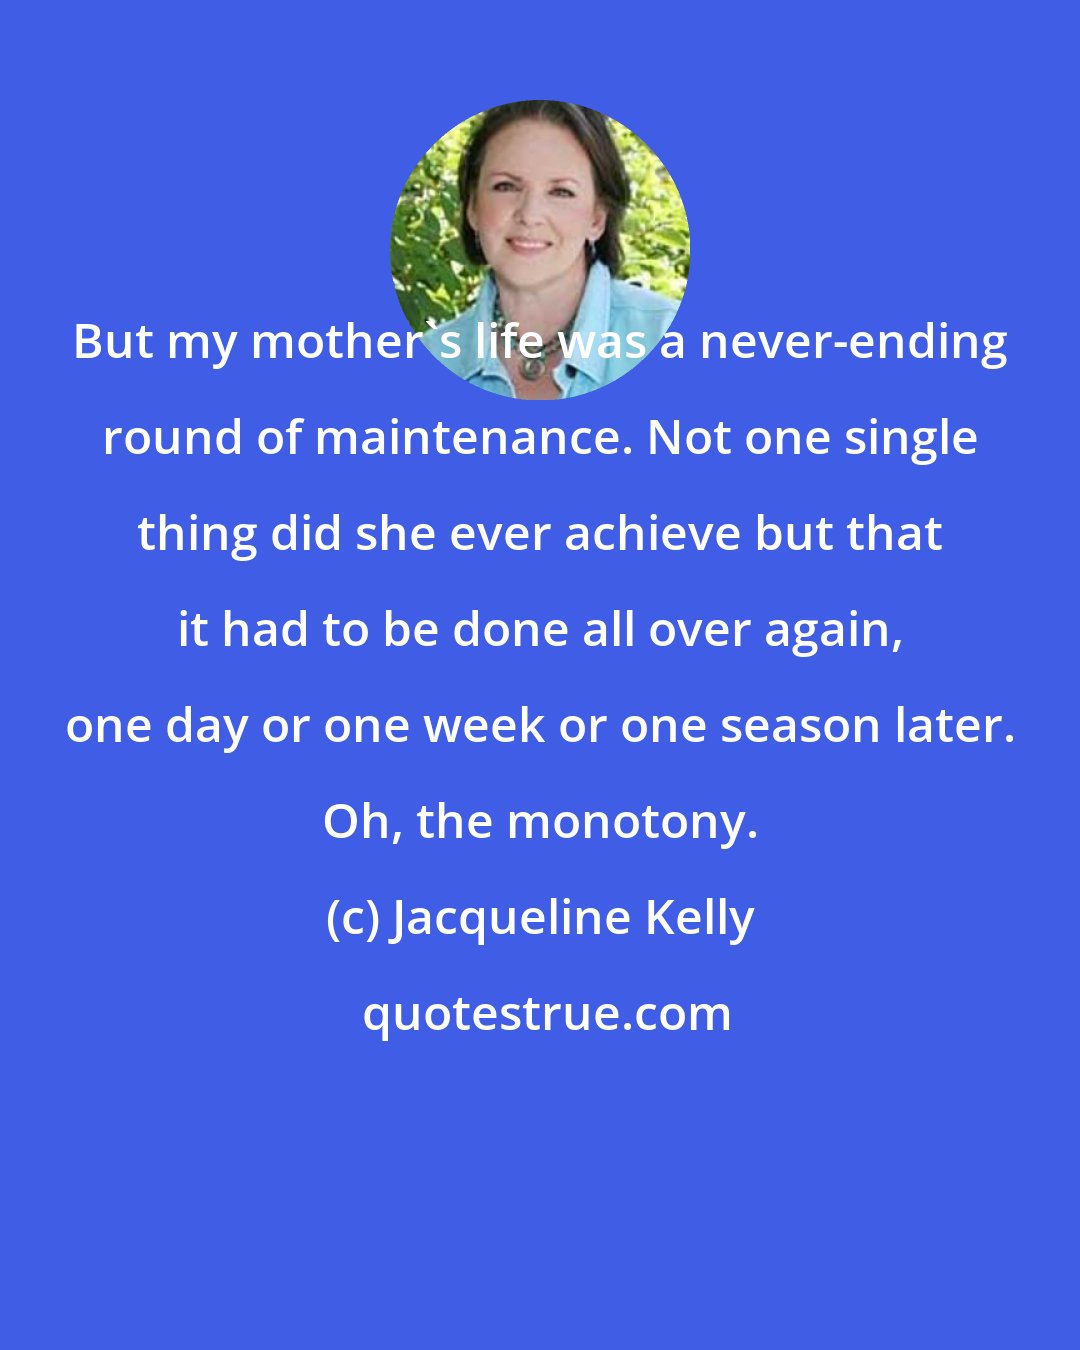 Jacqueline Kelly: But my mother's life was a never-ending round of maintenance. Not one single thing did she ever achieve but that it had to be done all over again, one day or one week or one season later. Oh, the monotony.